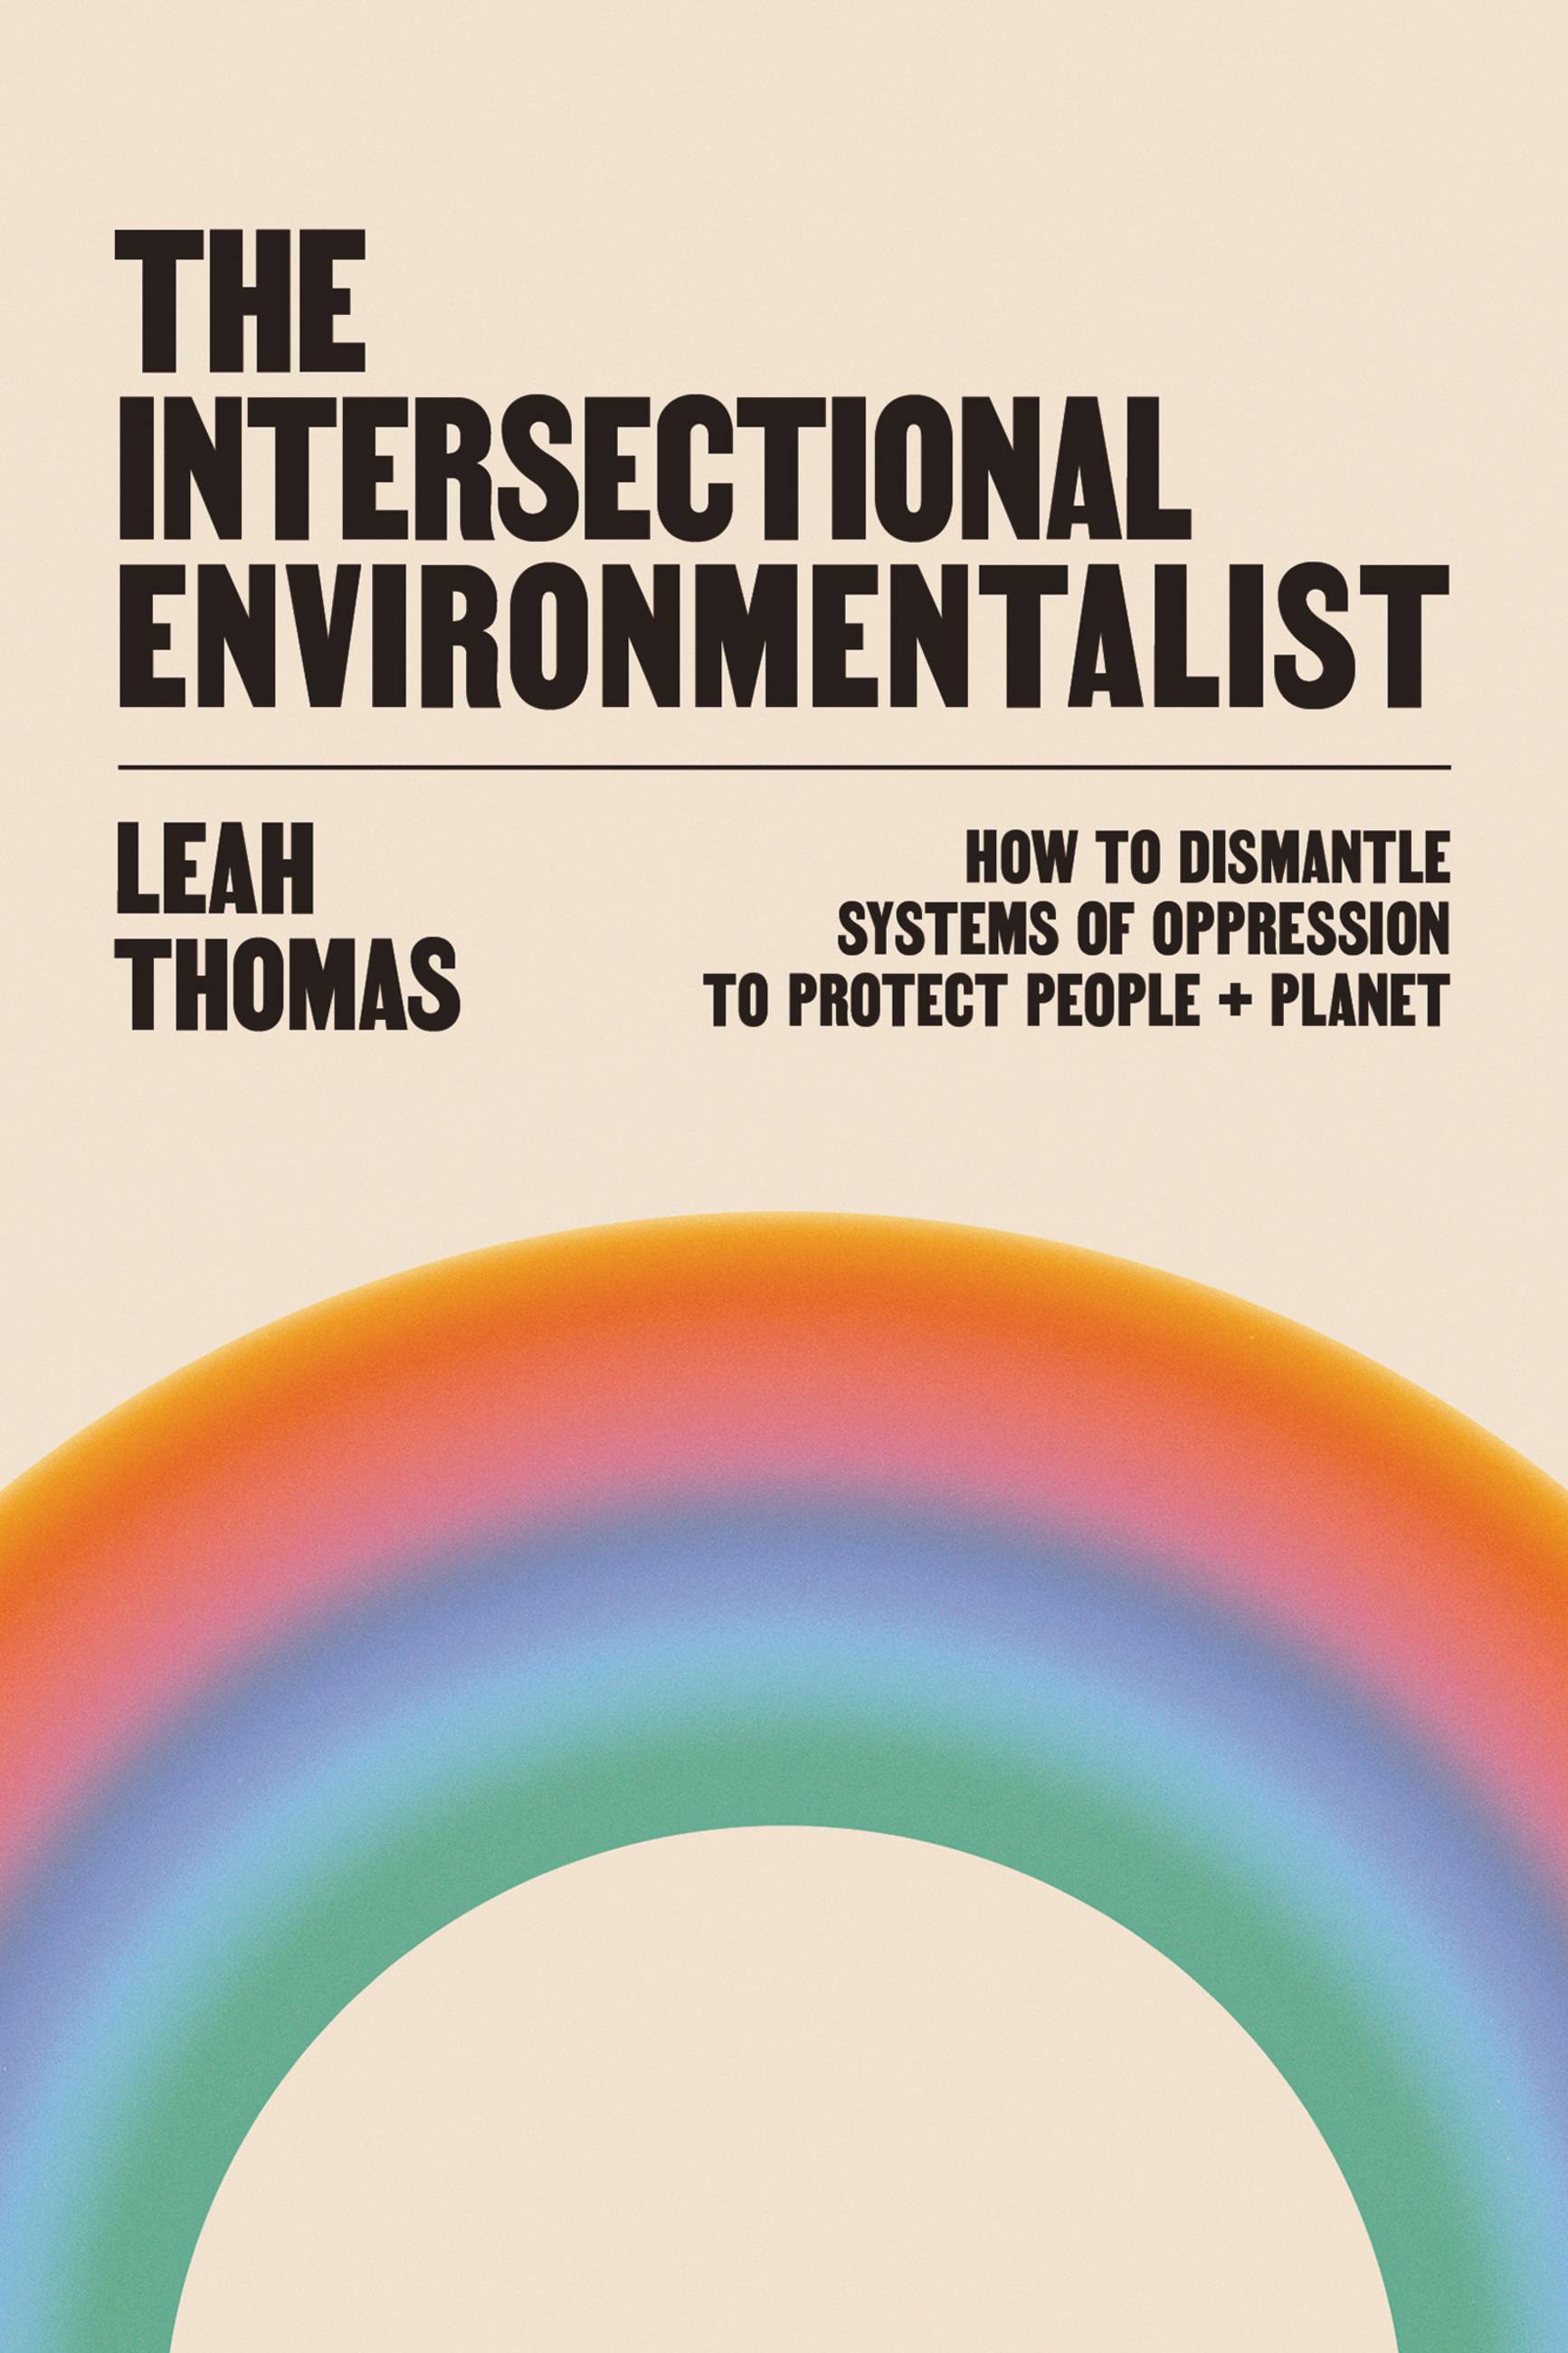 The Intersectional Environmentalist by Leah Thomas | Hachette Book 